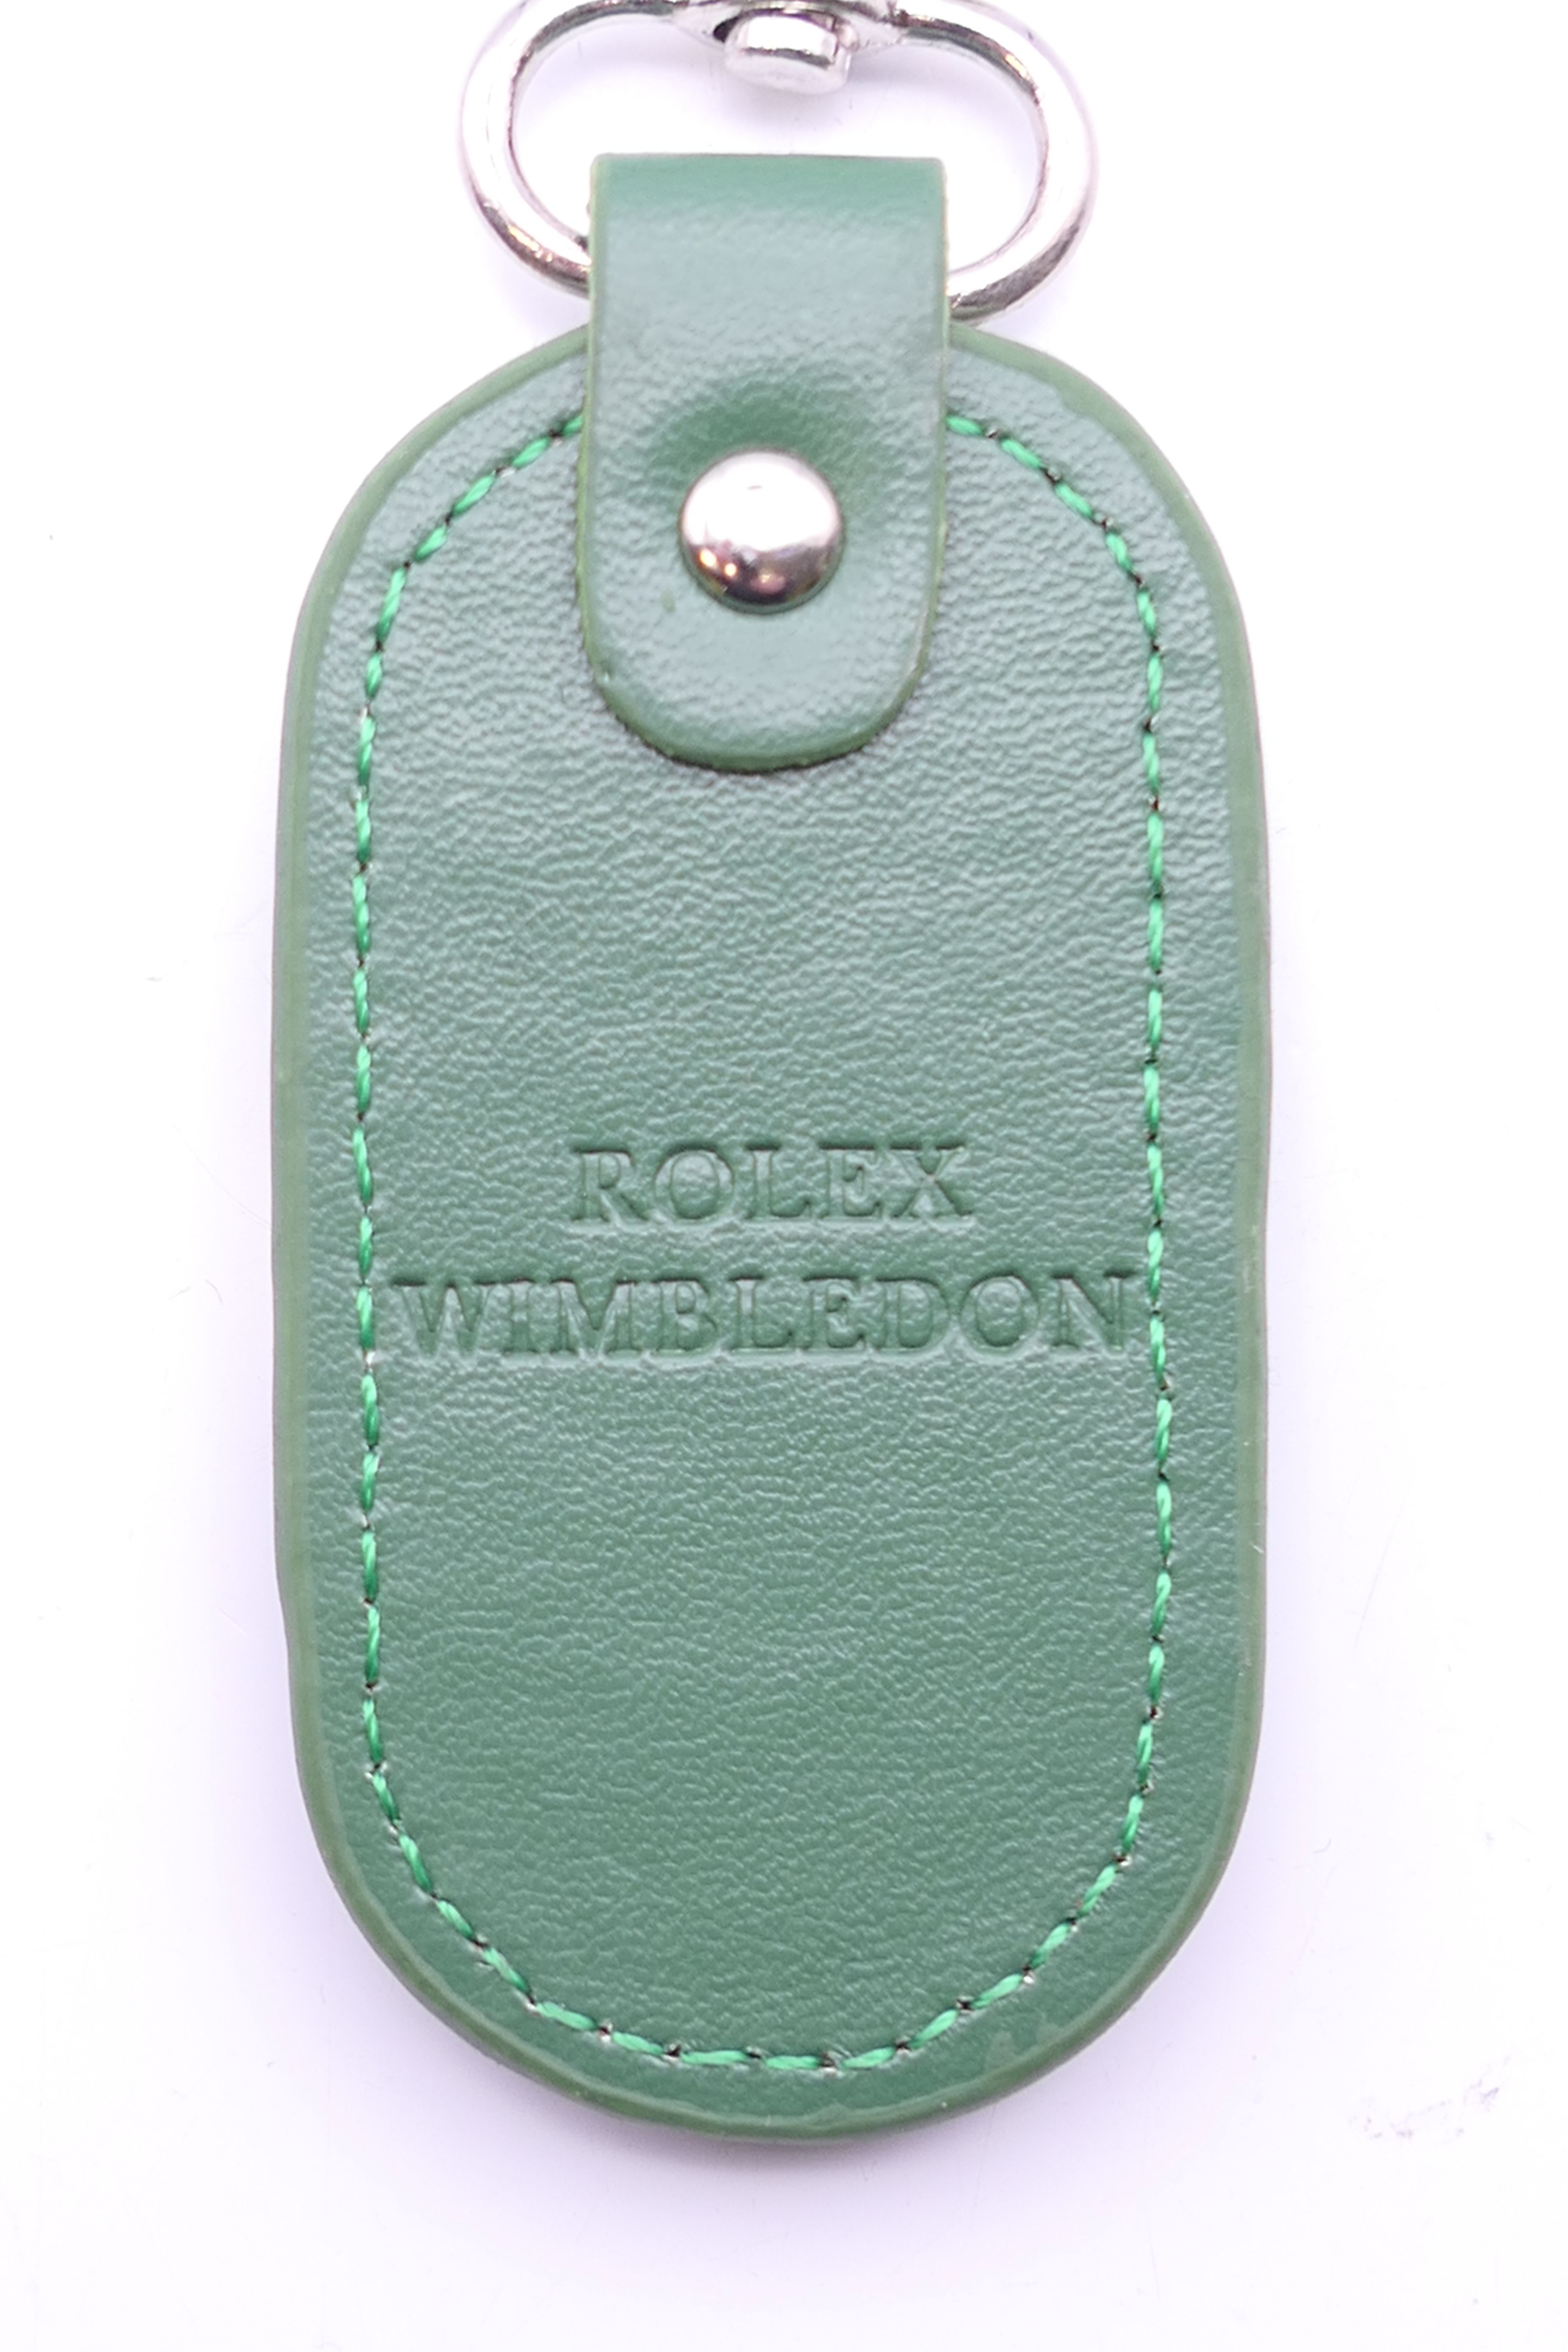 A boxed set of Wimbledon/Rolex cufflinks and keyring, and a Rolex lanyard ID holder. Cufflinks 1. - Image 7 of 8